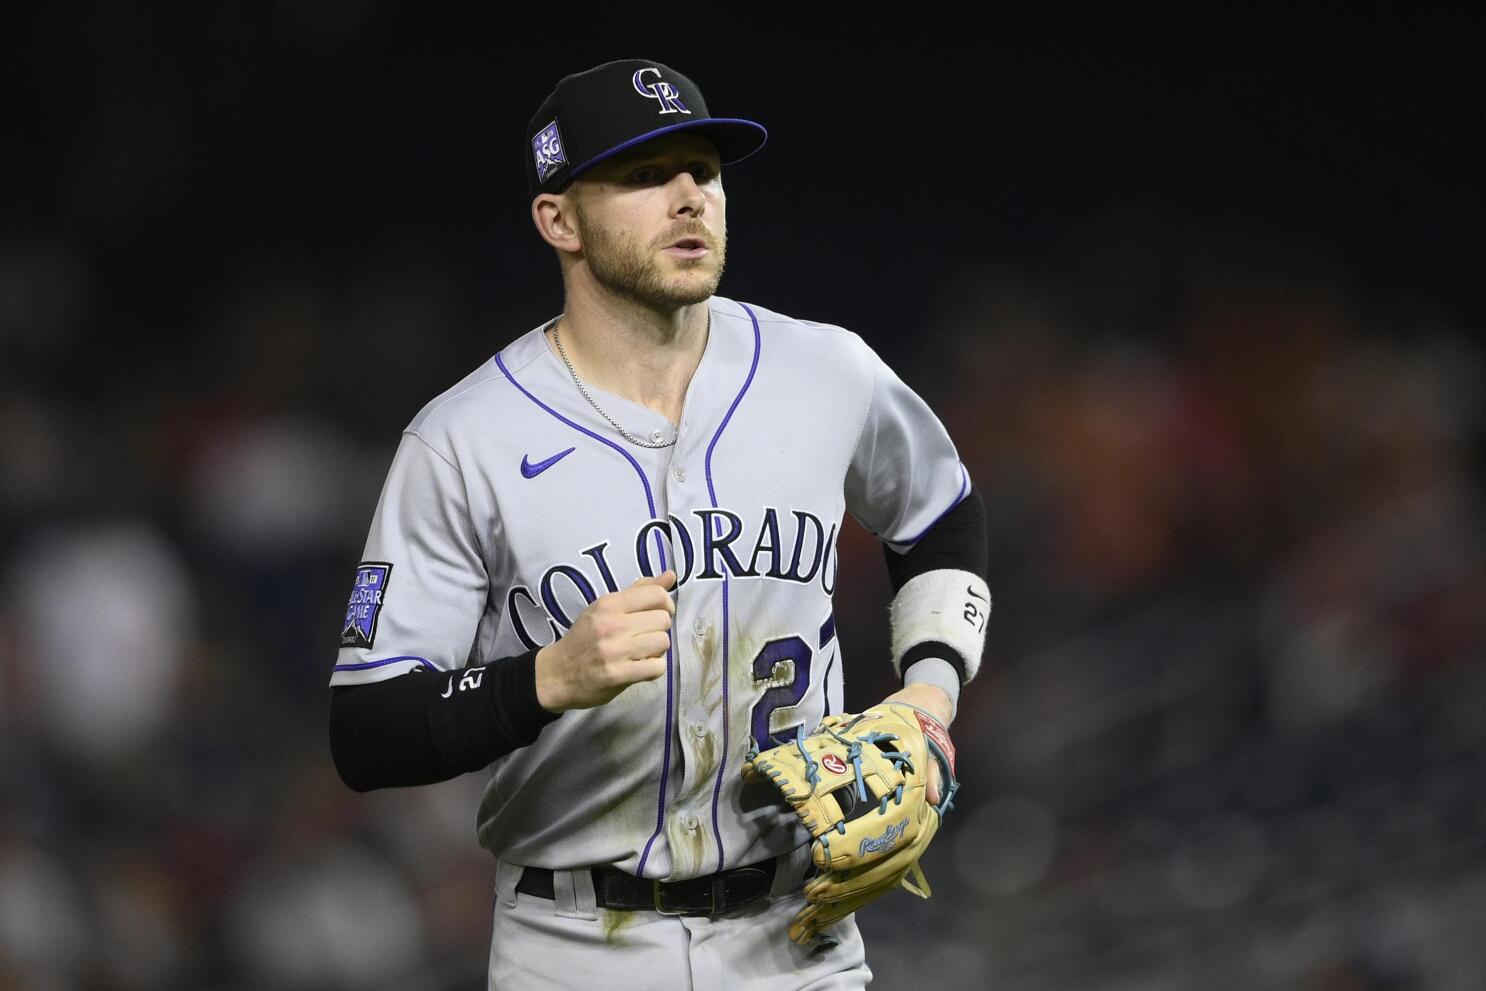 Trevor Story has been excellent at shortstop for the Red Sox, but